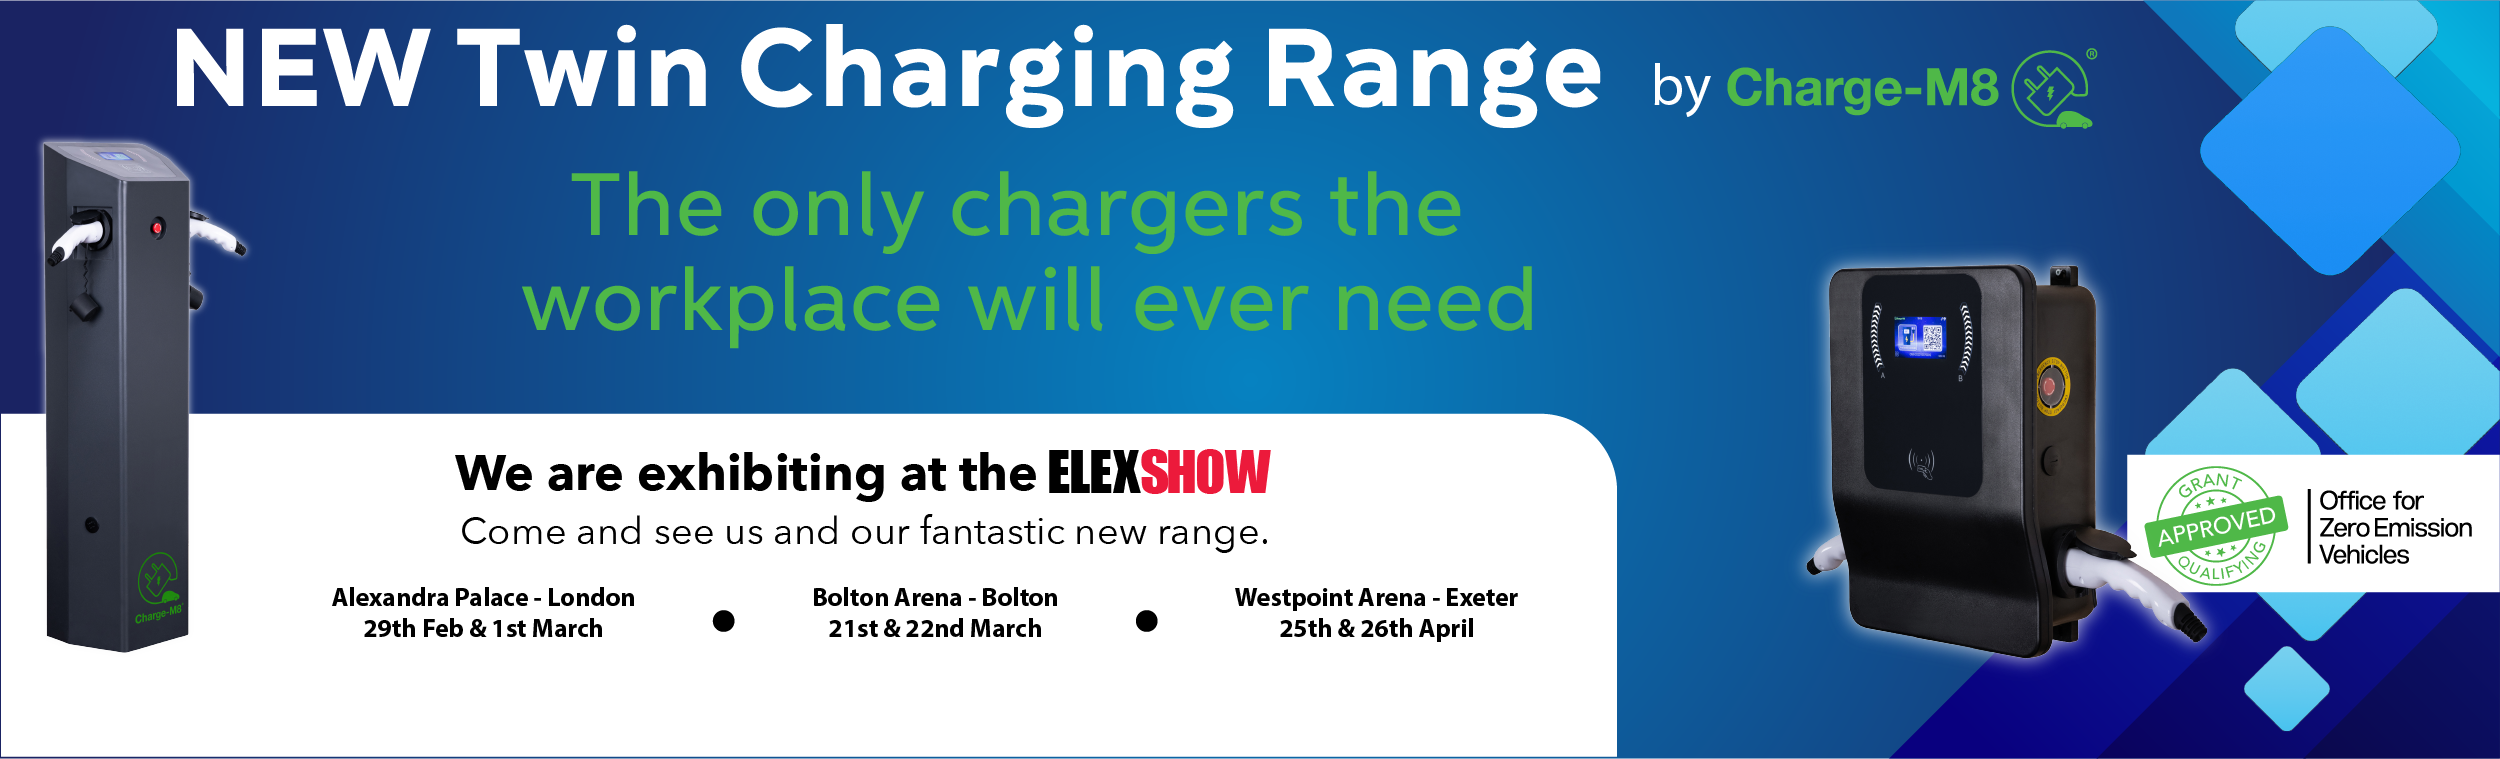 Charge-M8 New Twin EV Chargers